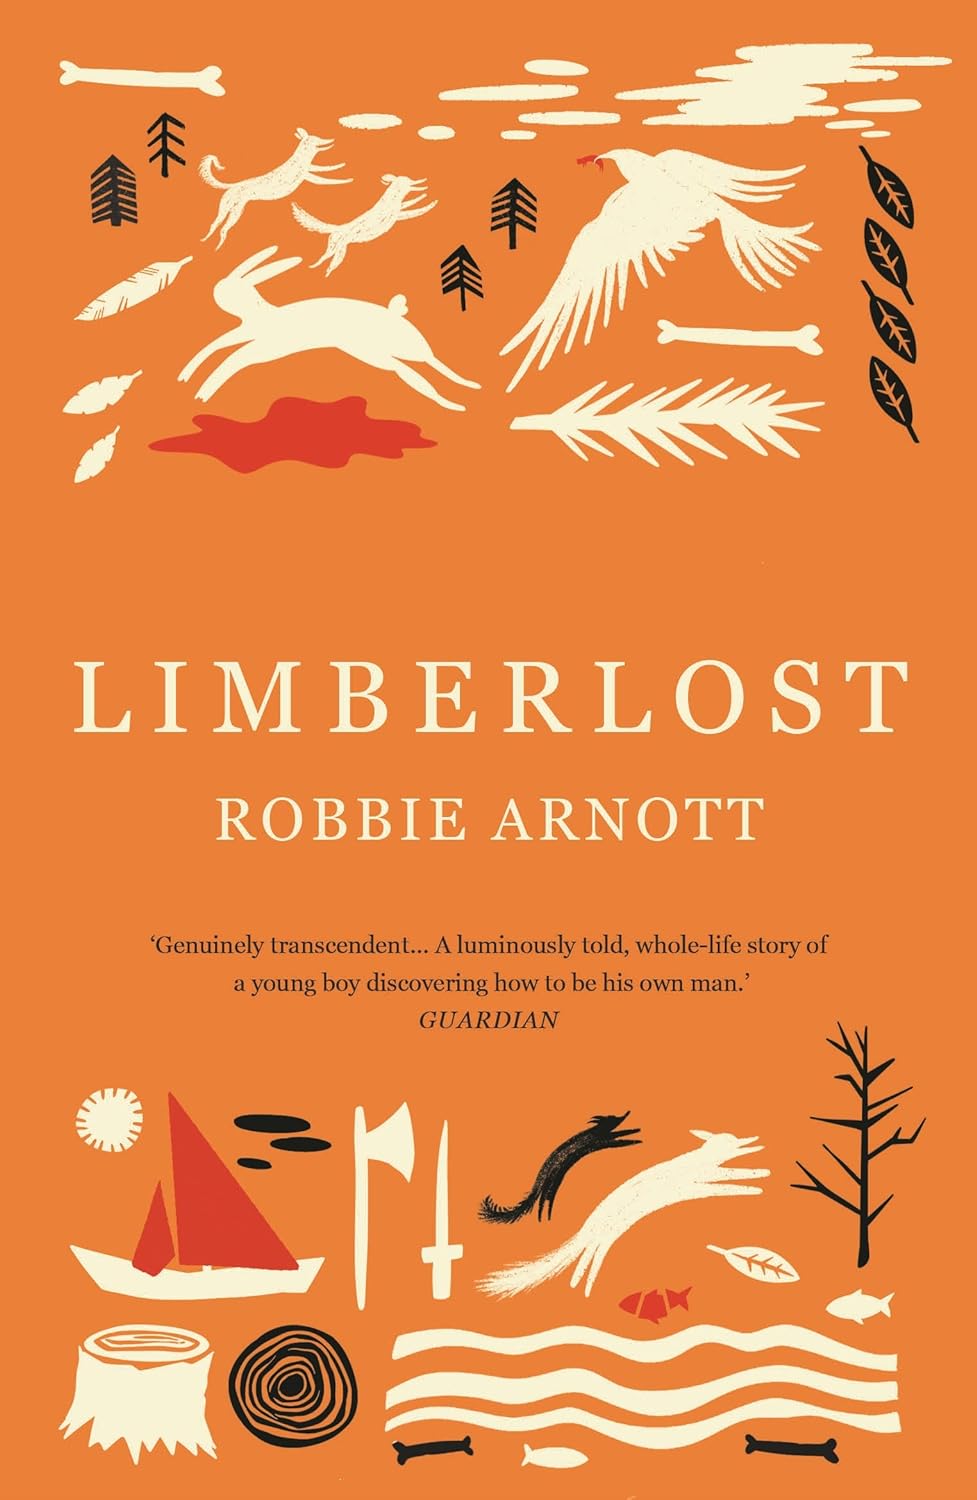 Discover Exciting Discounts on Limberlost: Robbie Arnott - Limited-Time Offer